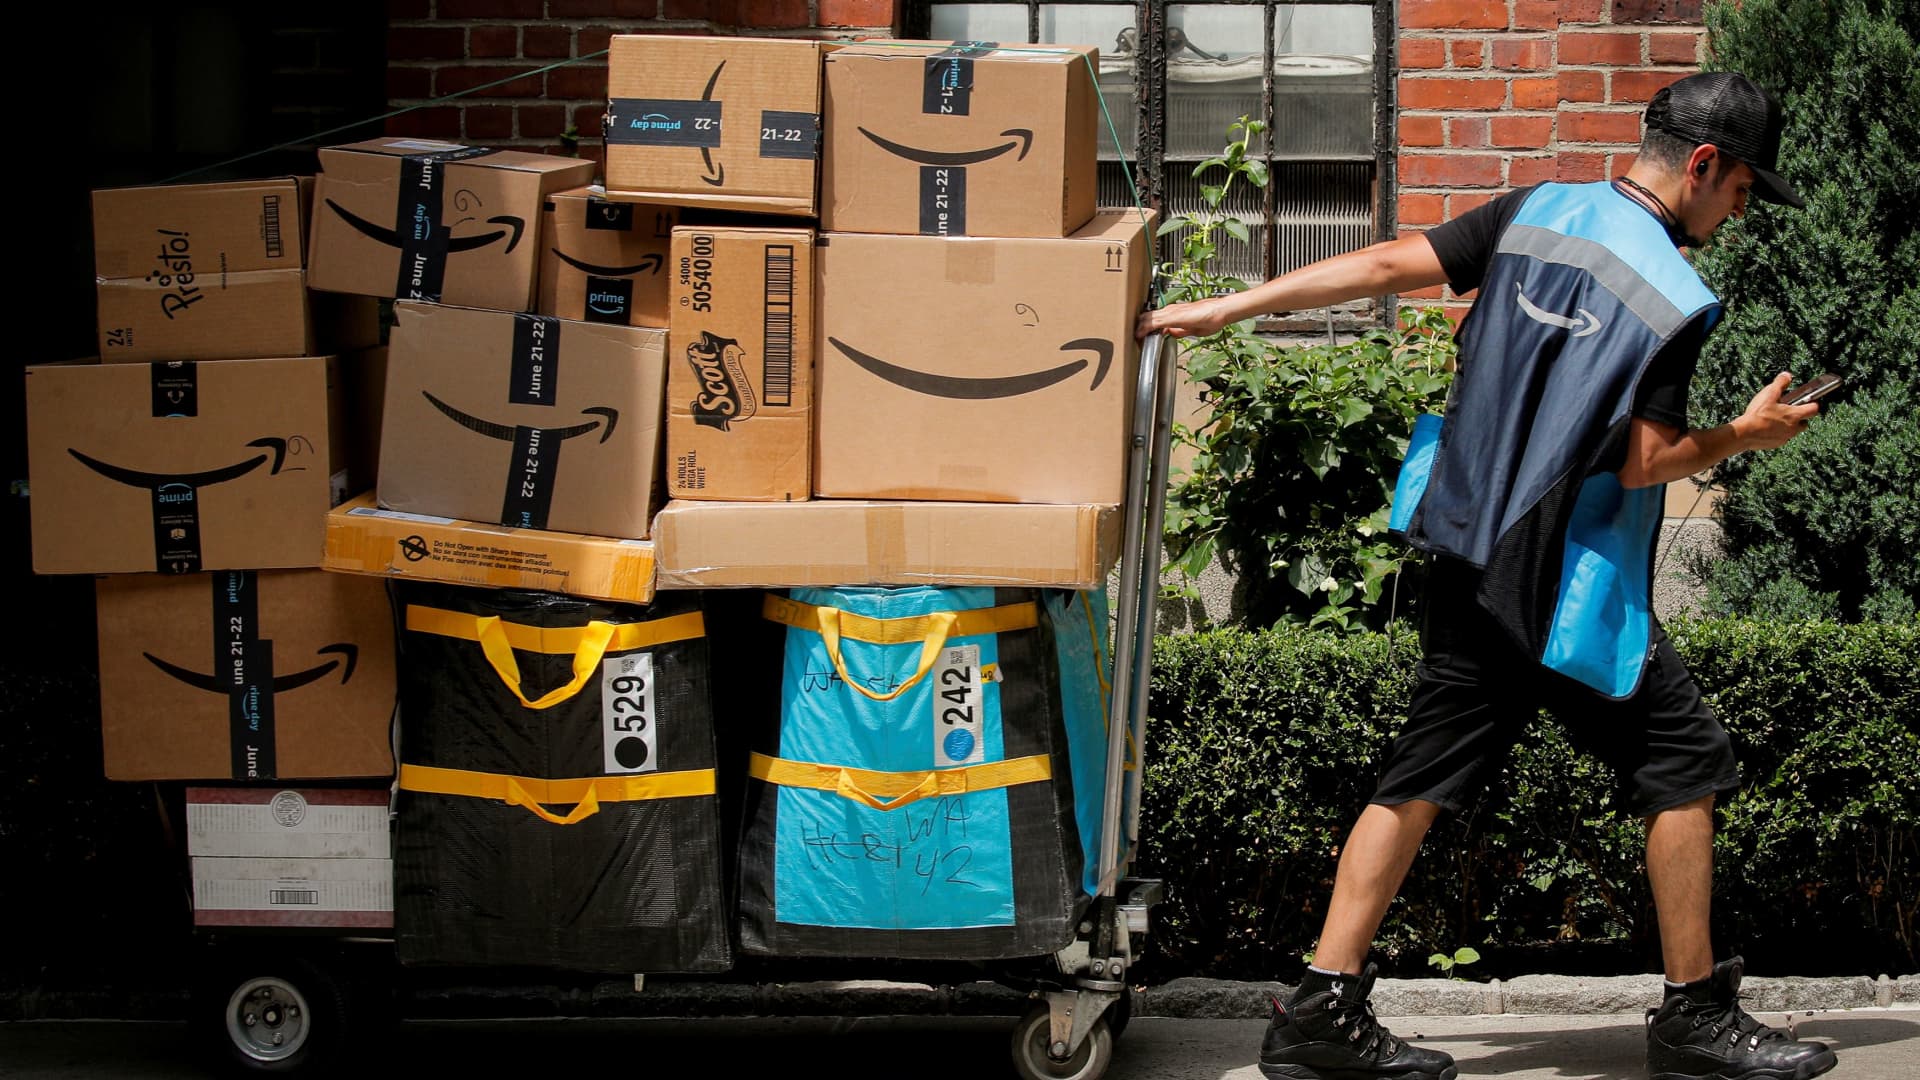 Amazon Prime Day is coming up: Here’s why deal experts say you might want to skip it this year